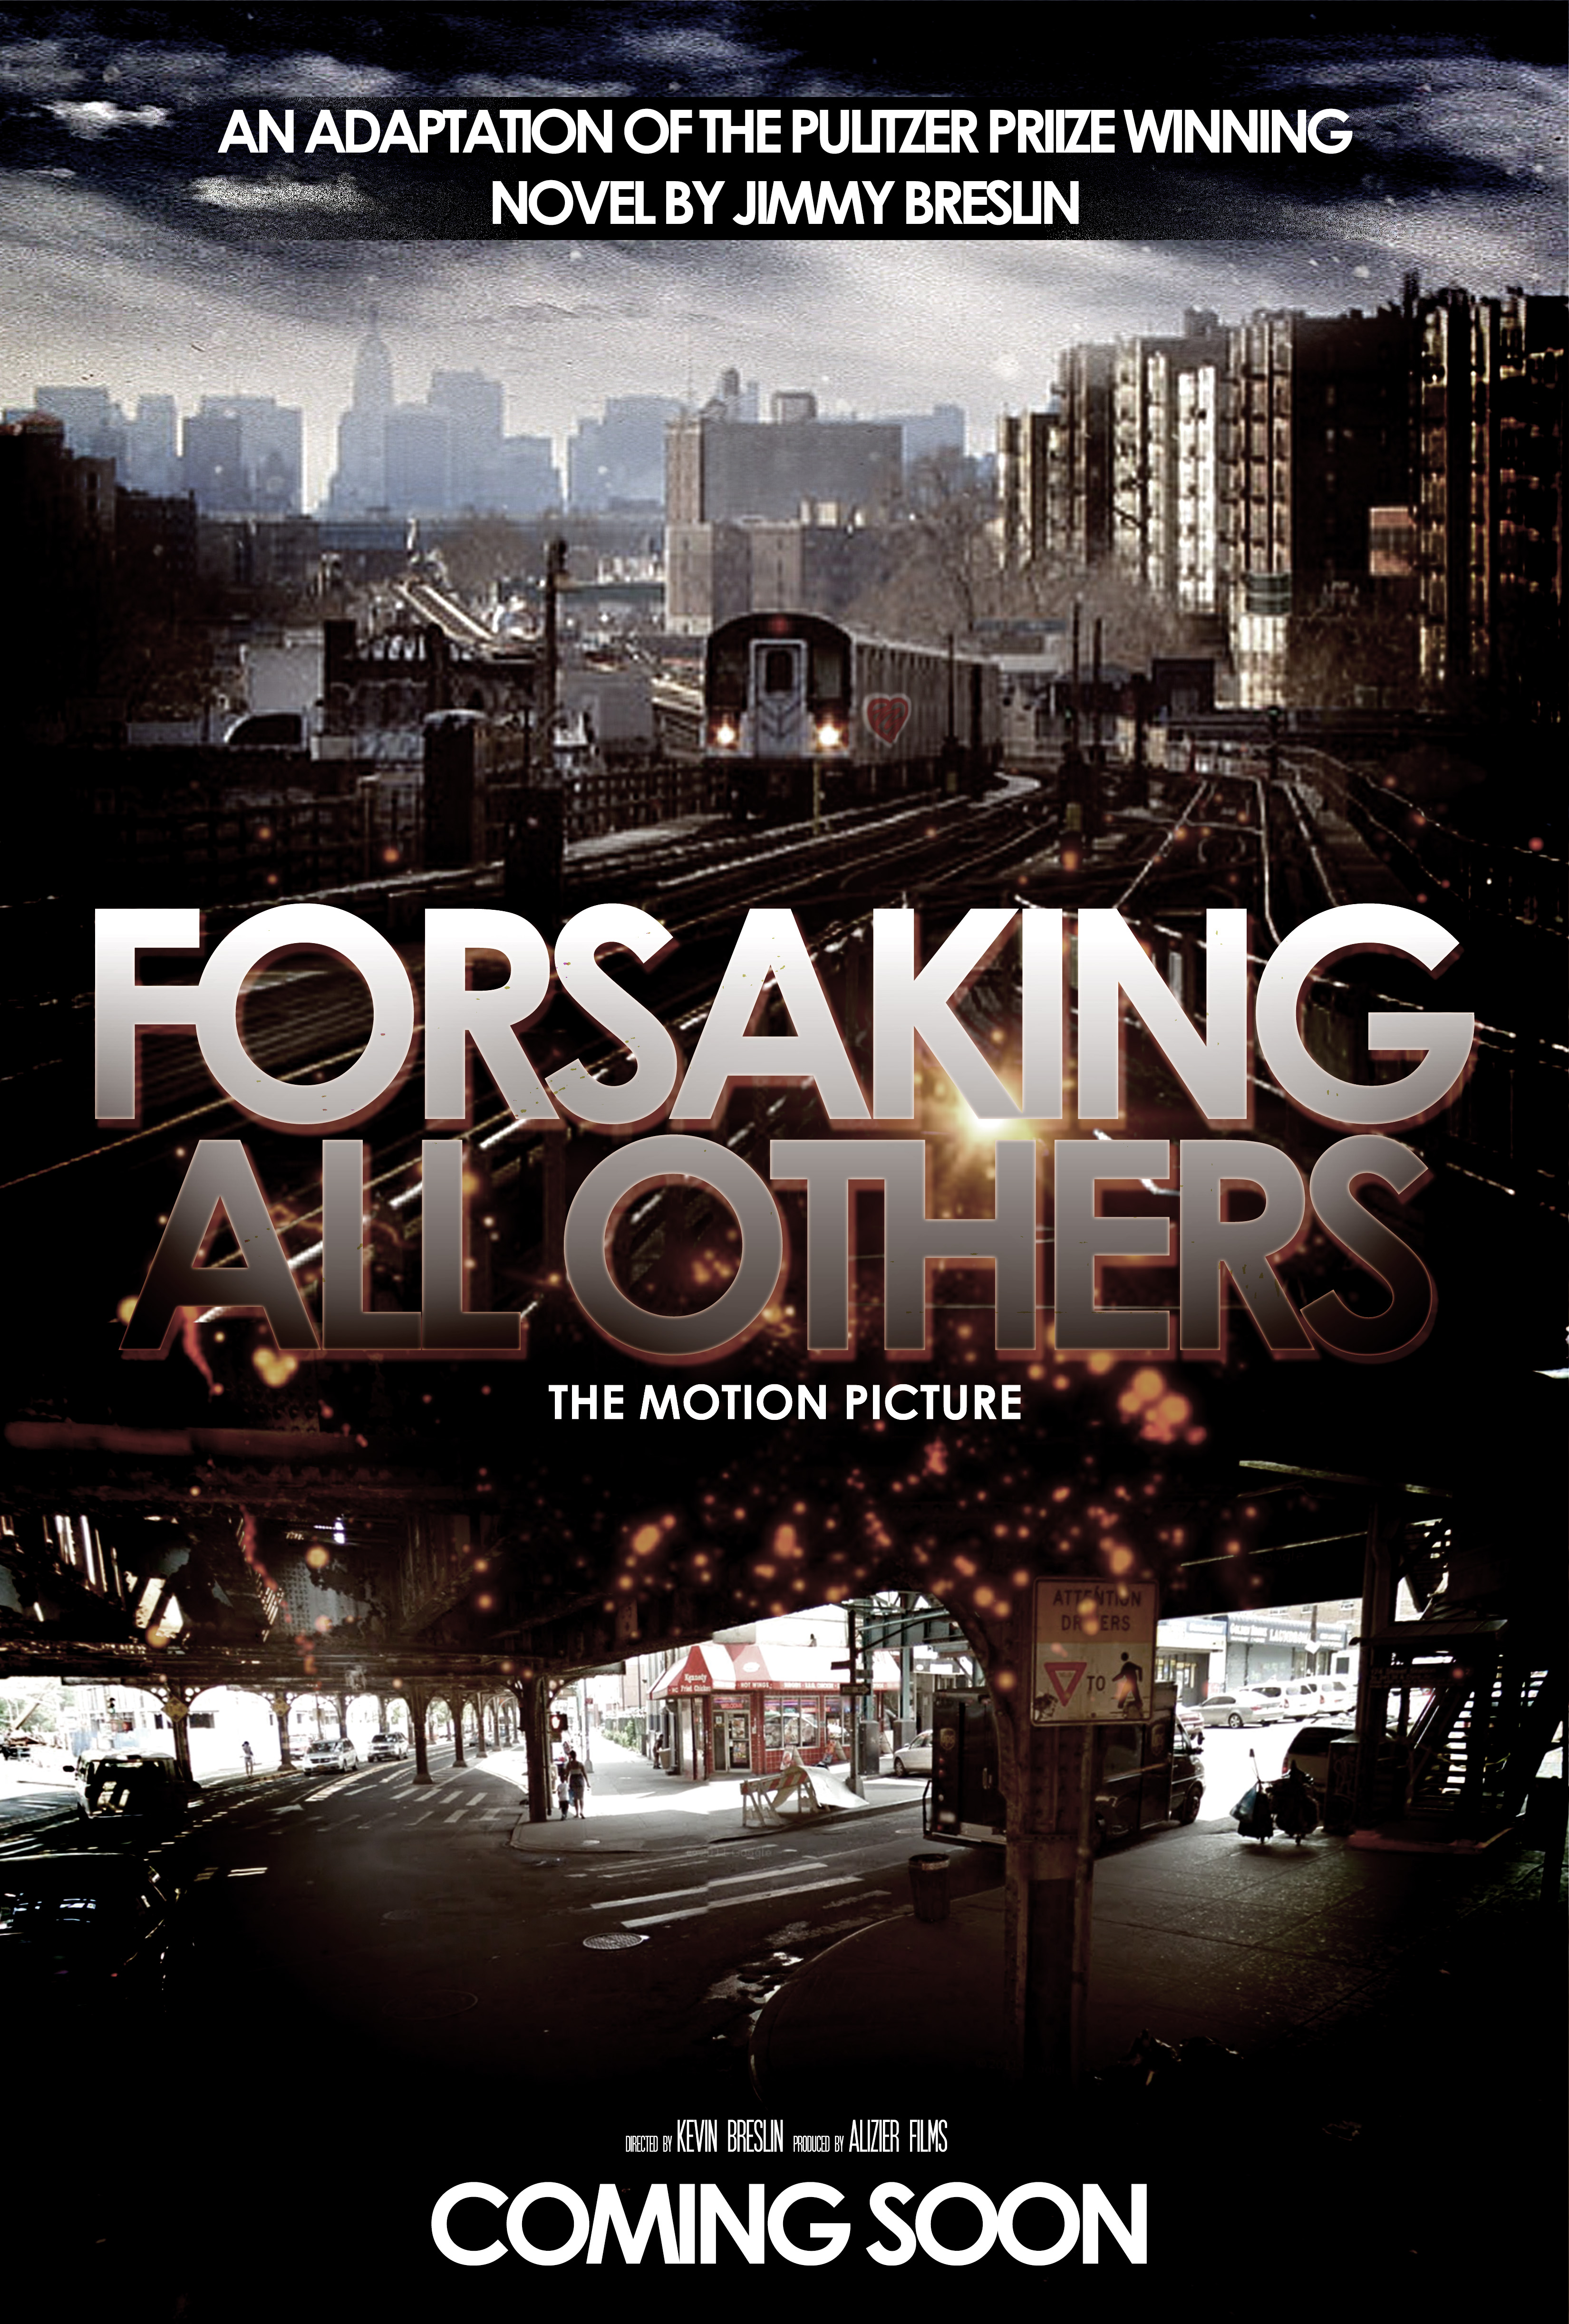 Forsaking All Others official Poster designed by Mikey Jay